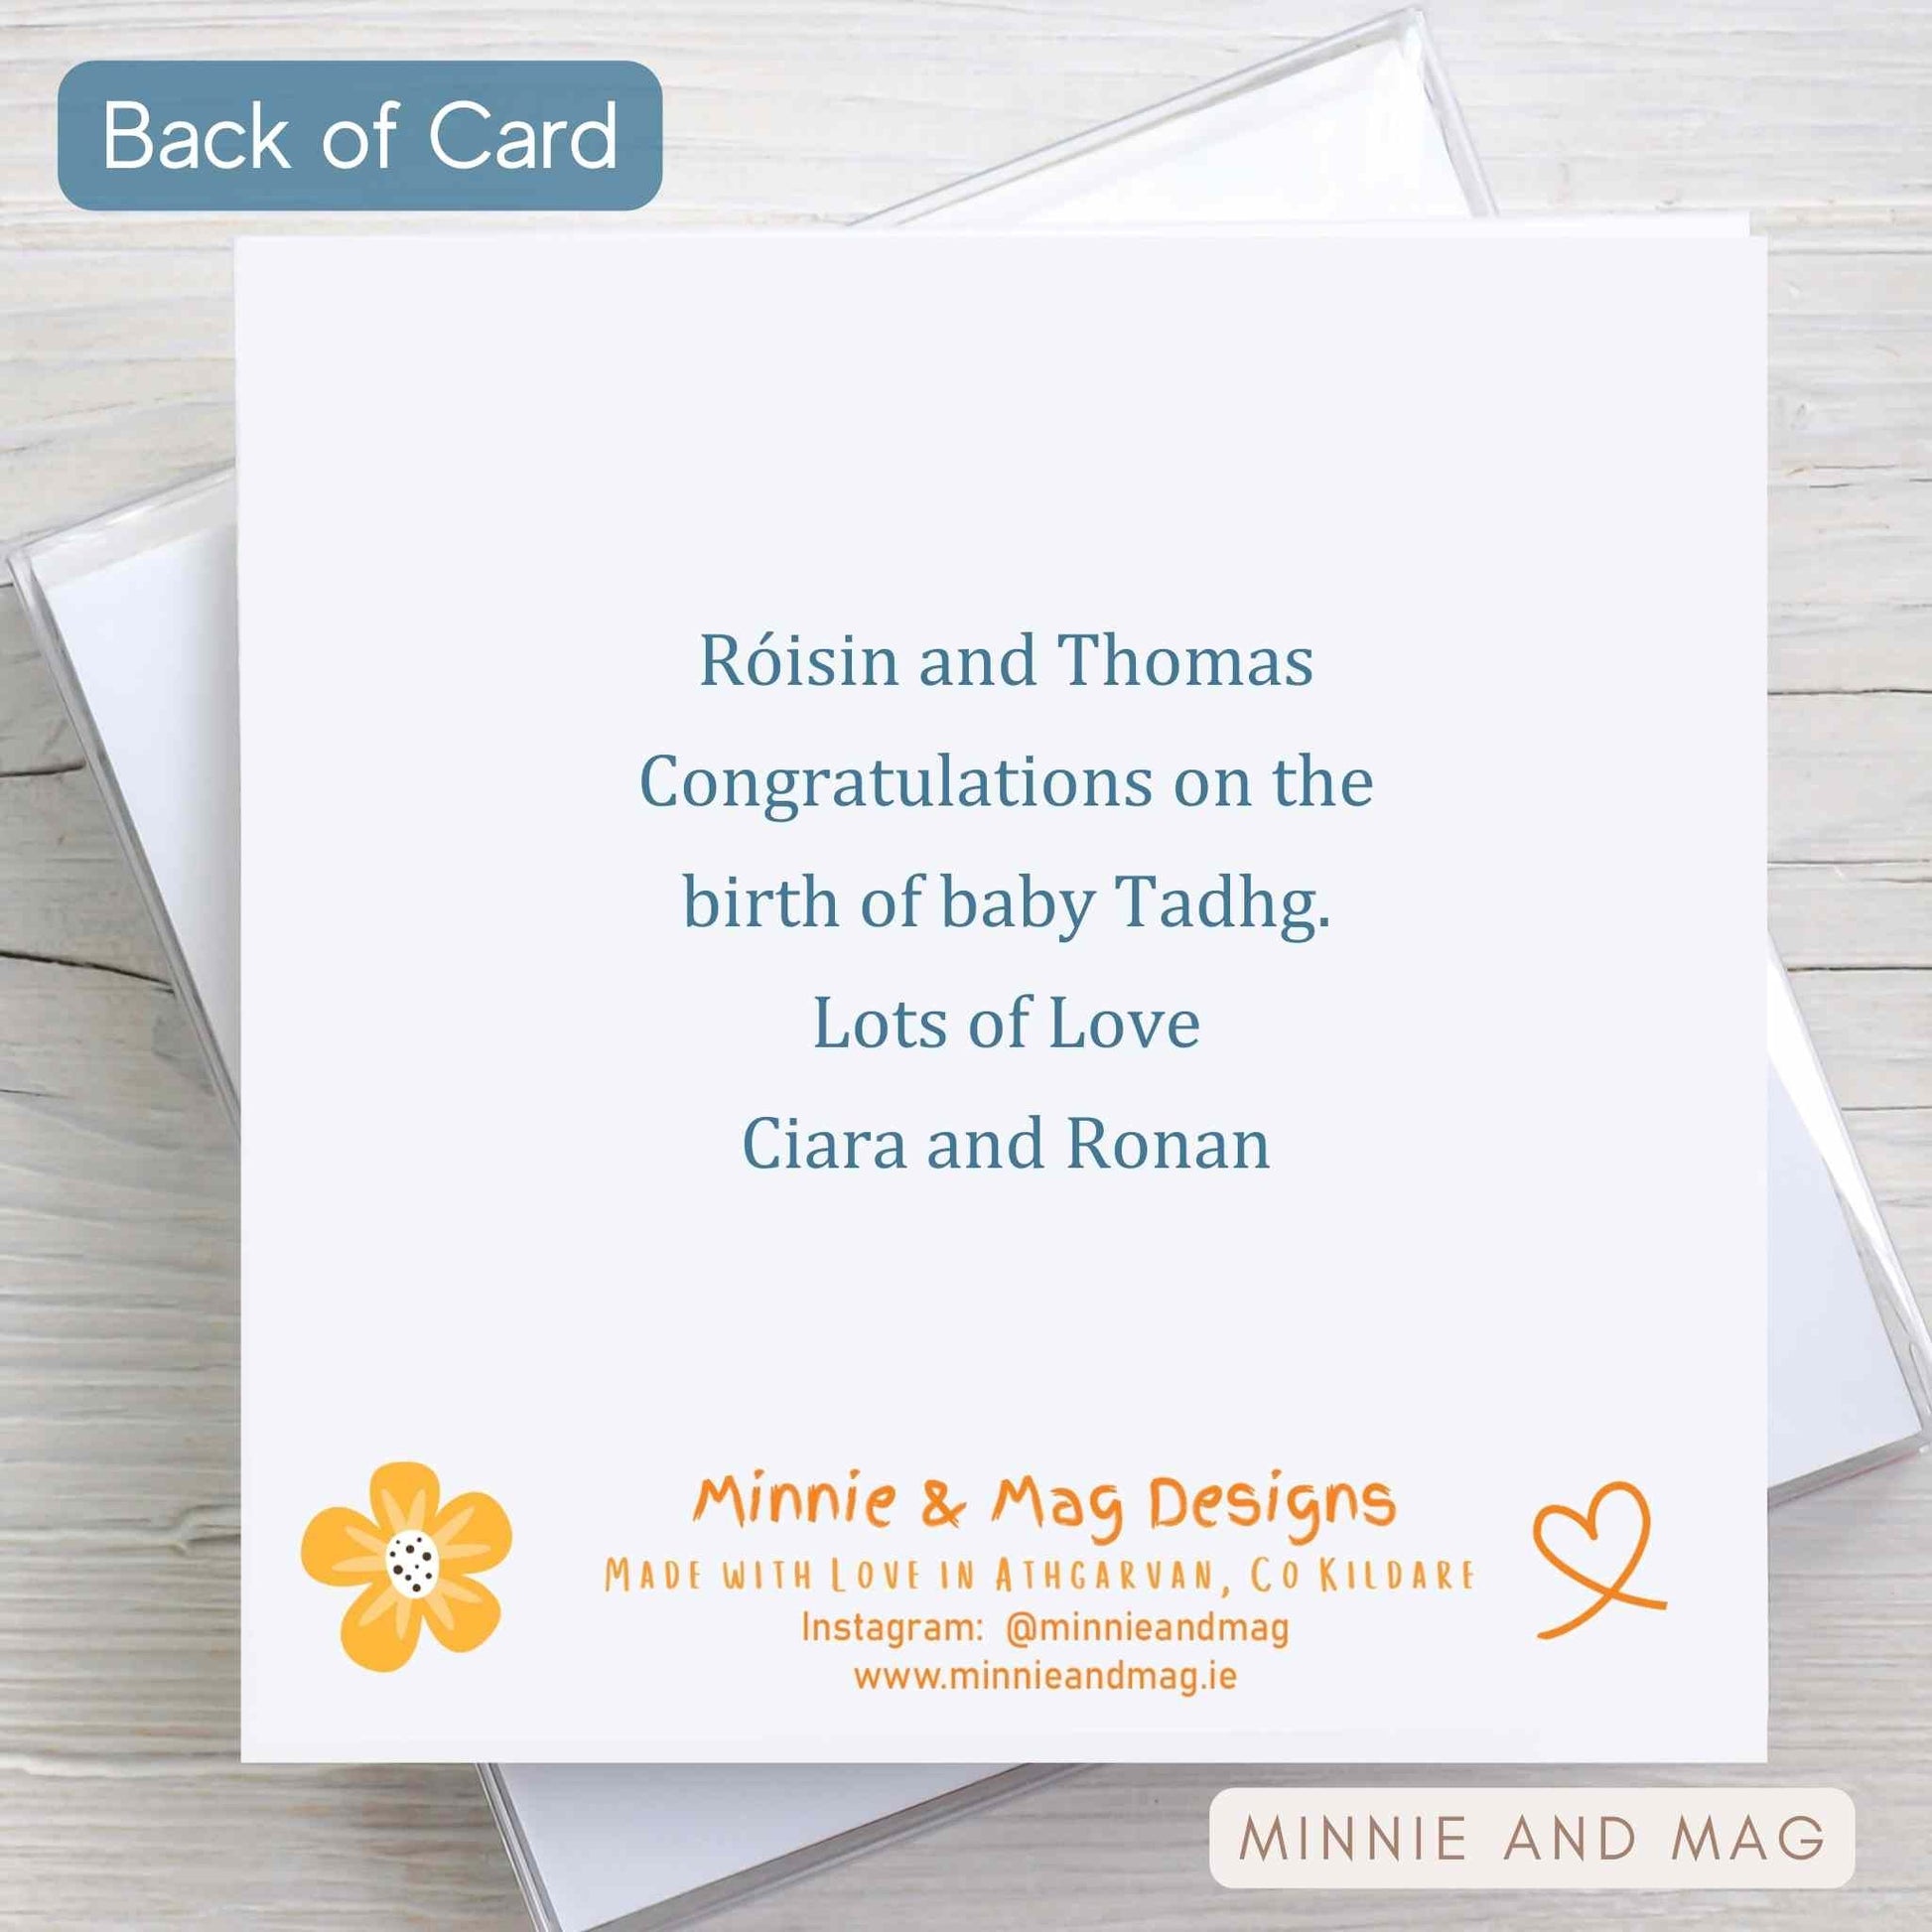 Personalised wording added to back of greeting card.